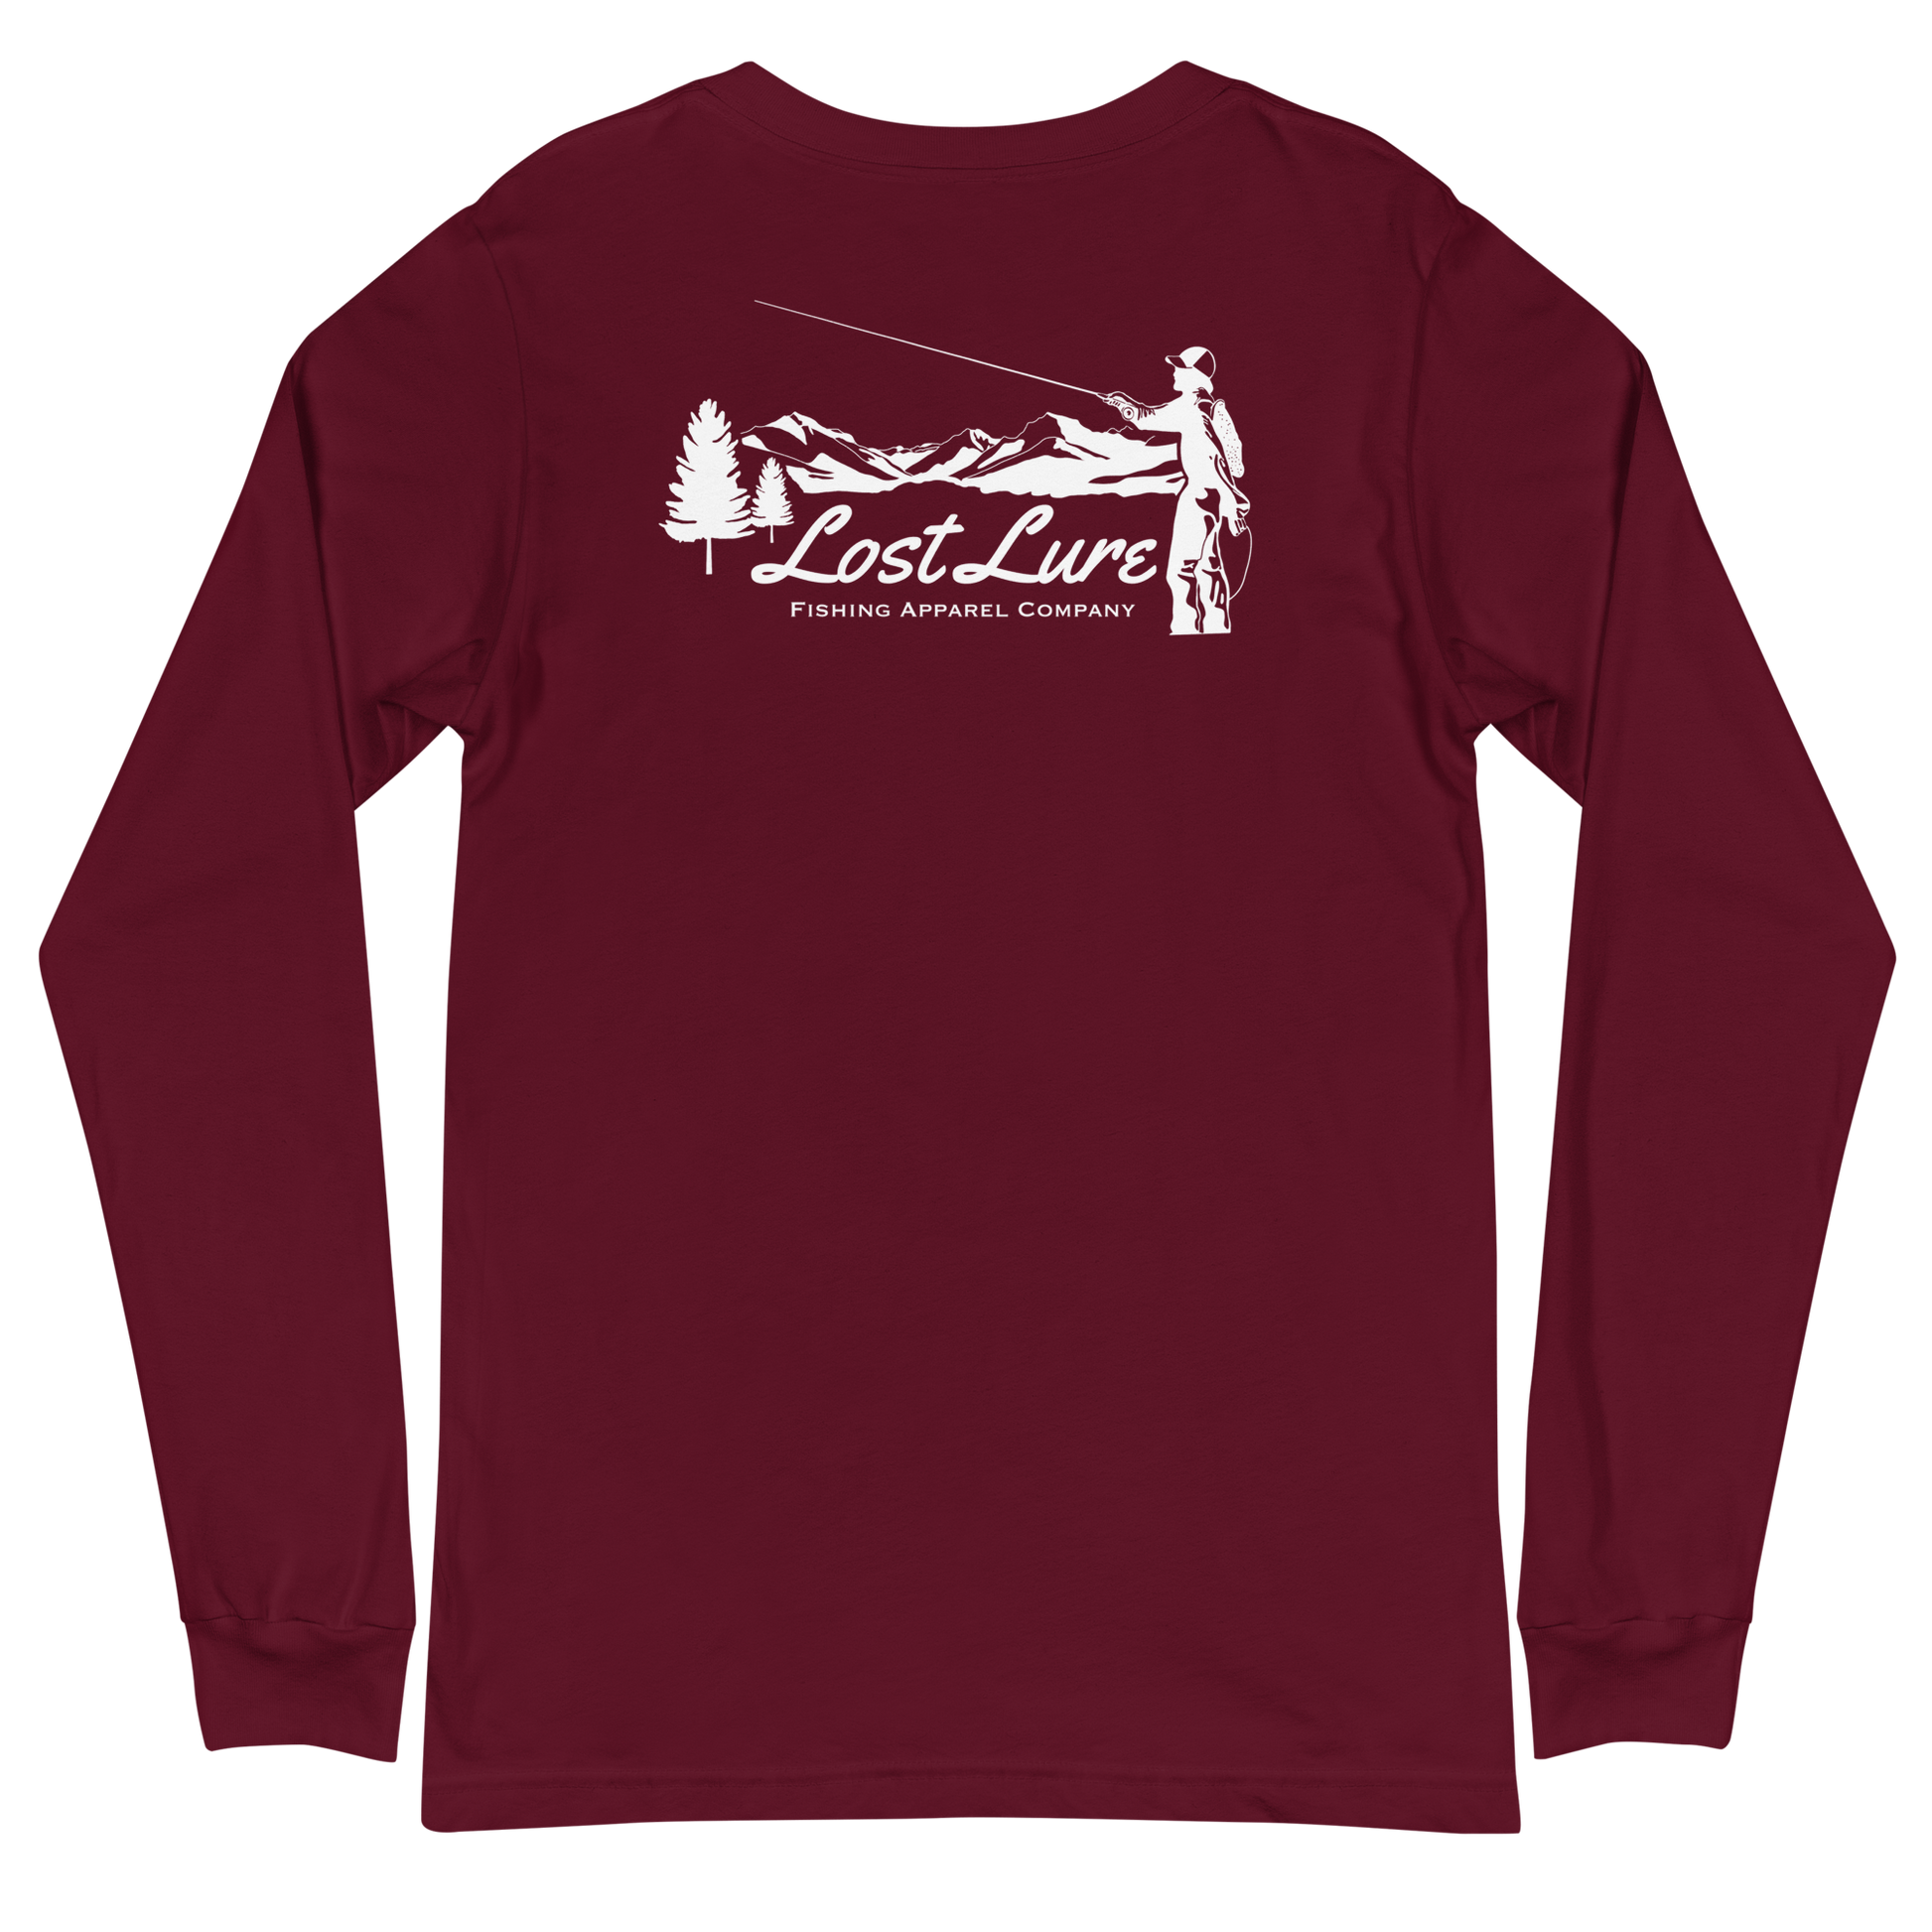 Fly fishing Lost lure long sleeve shirt. It has a design on the back of the shirt black and white outline a fly fisherman and the Rocky Mountains. Red fishing shirt, back side